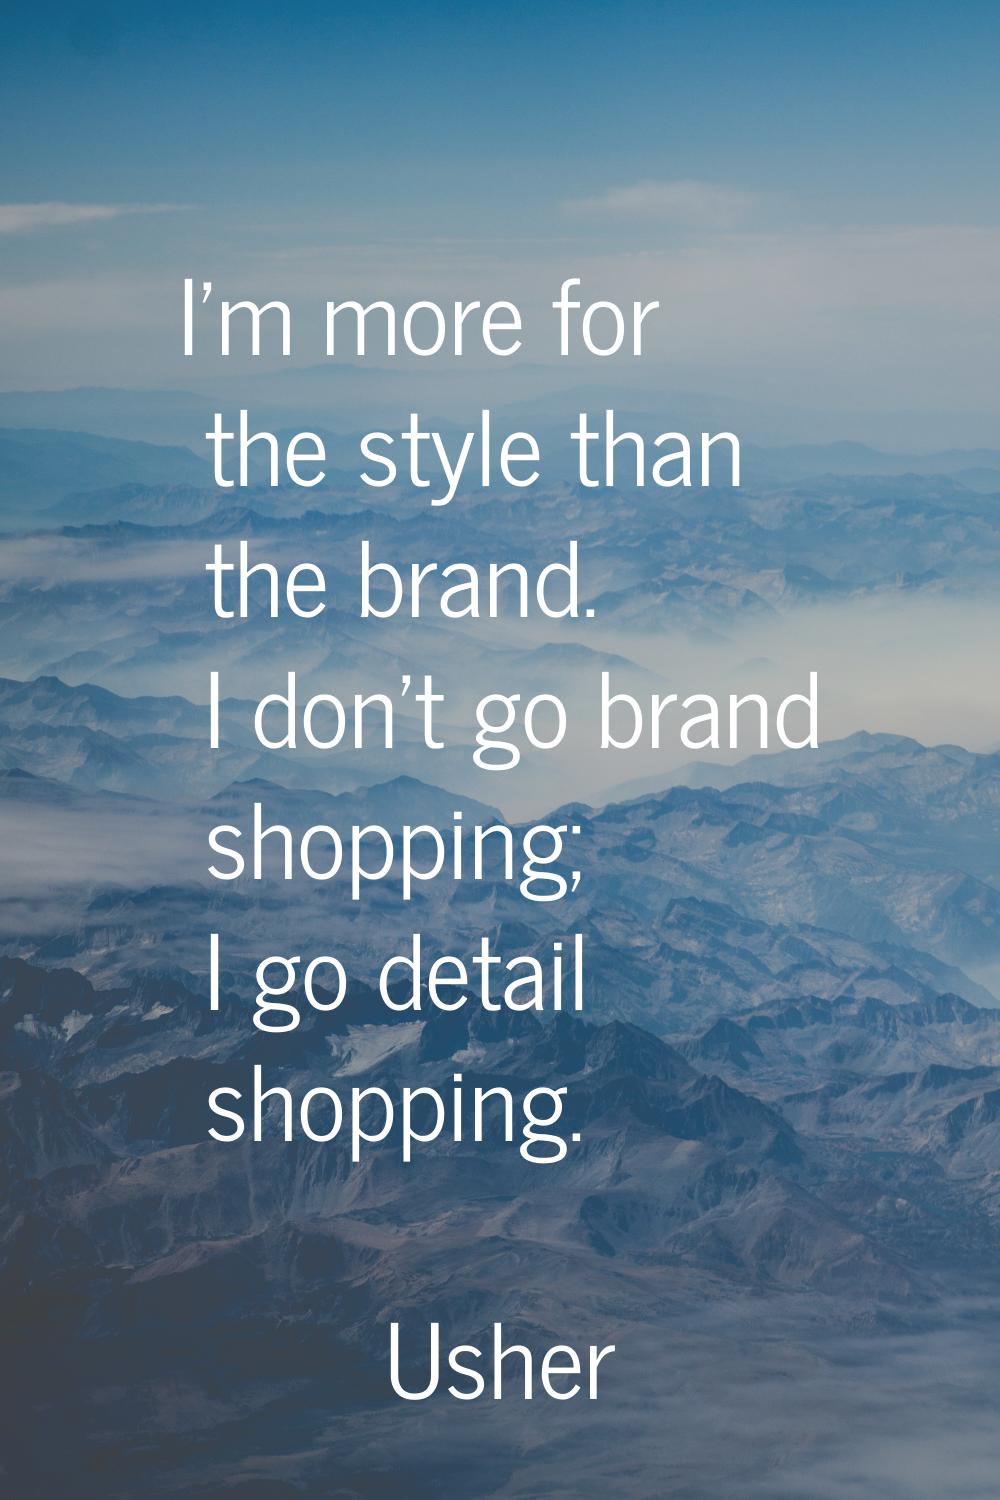 I'm more for the style than the brand. I don't go brand shopping; I go detail shopping.